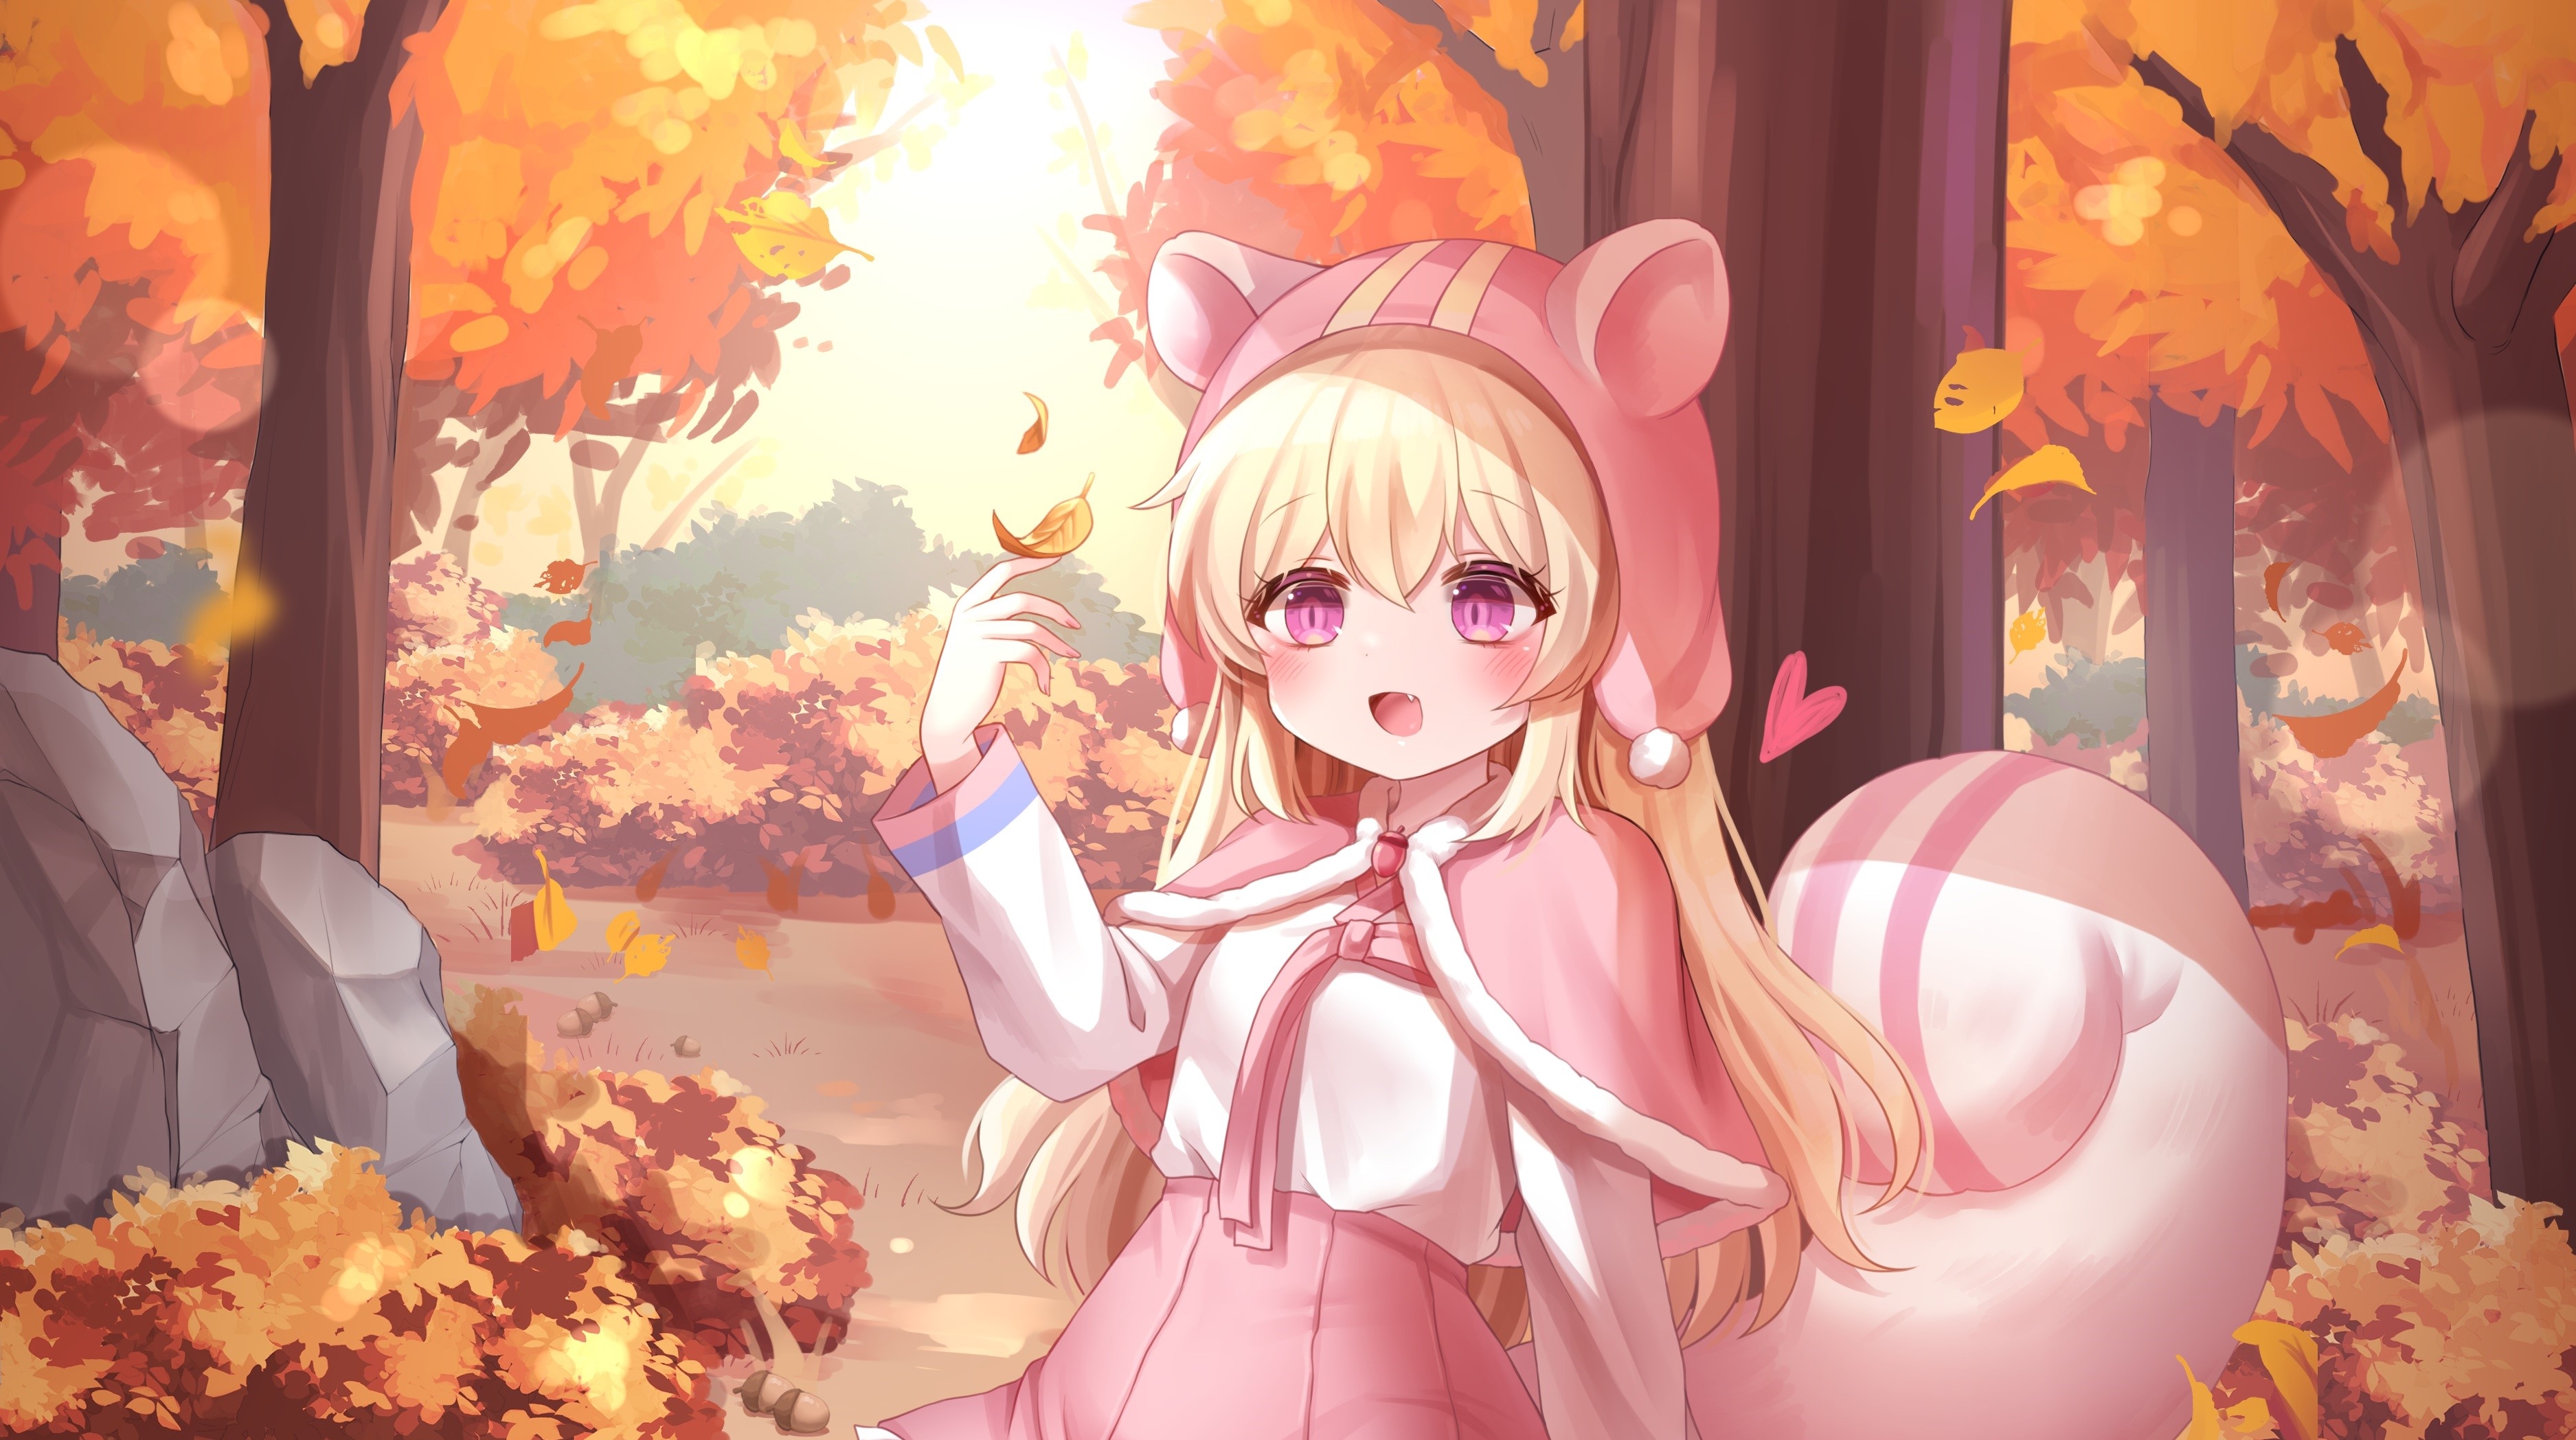 Download 3750x2097 Animal Ears, Autumn, Blonde, Cute Anime Girl, Blushes, Leaves, Fang Wallpaper